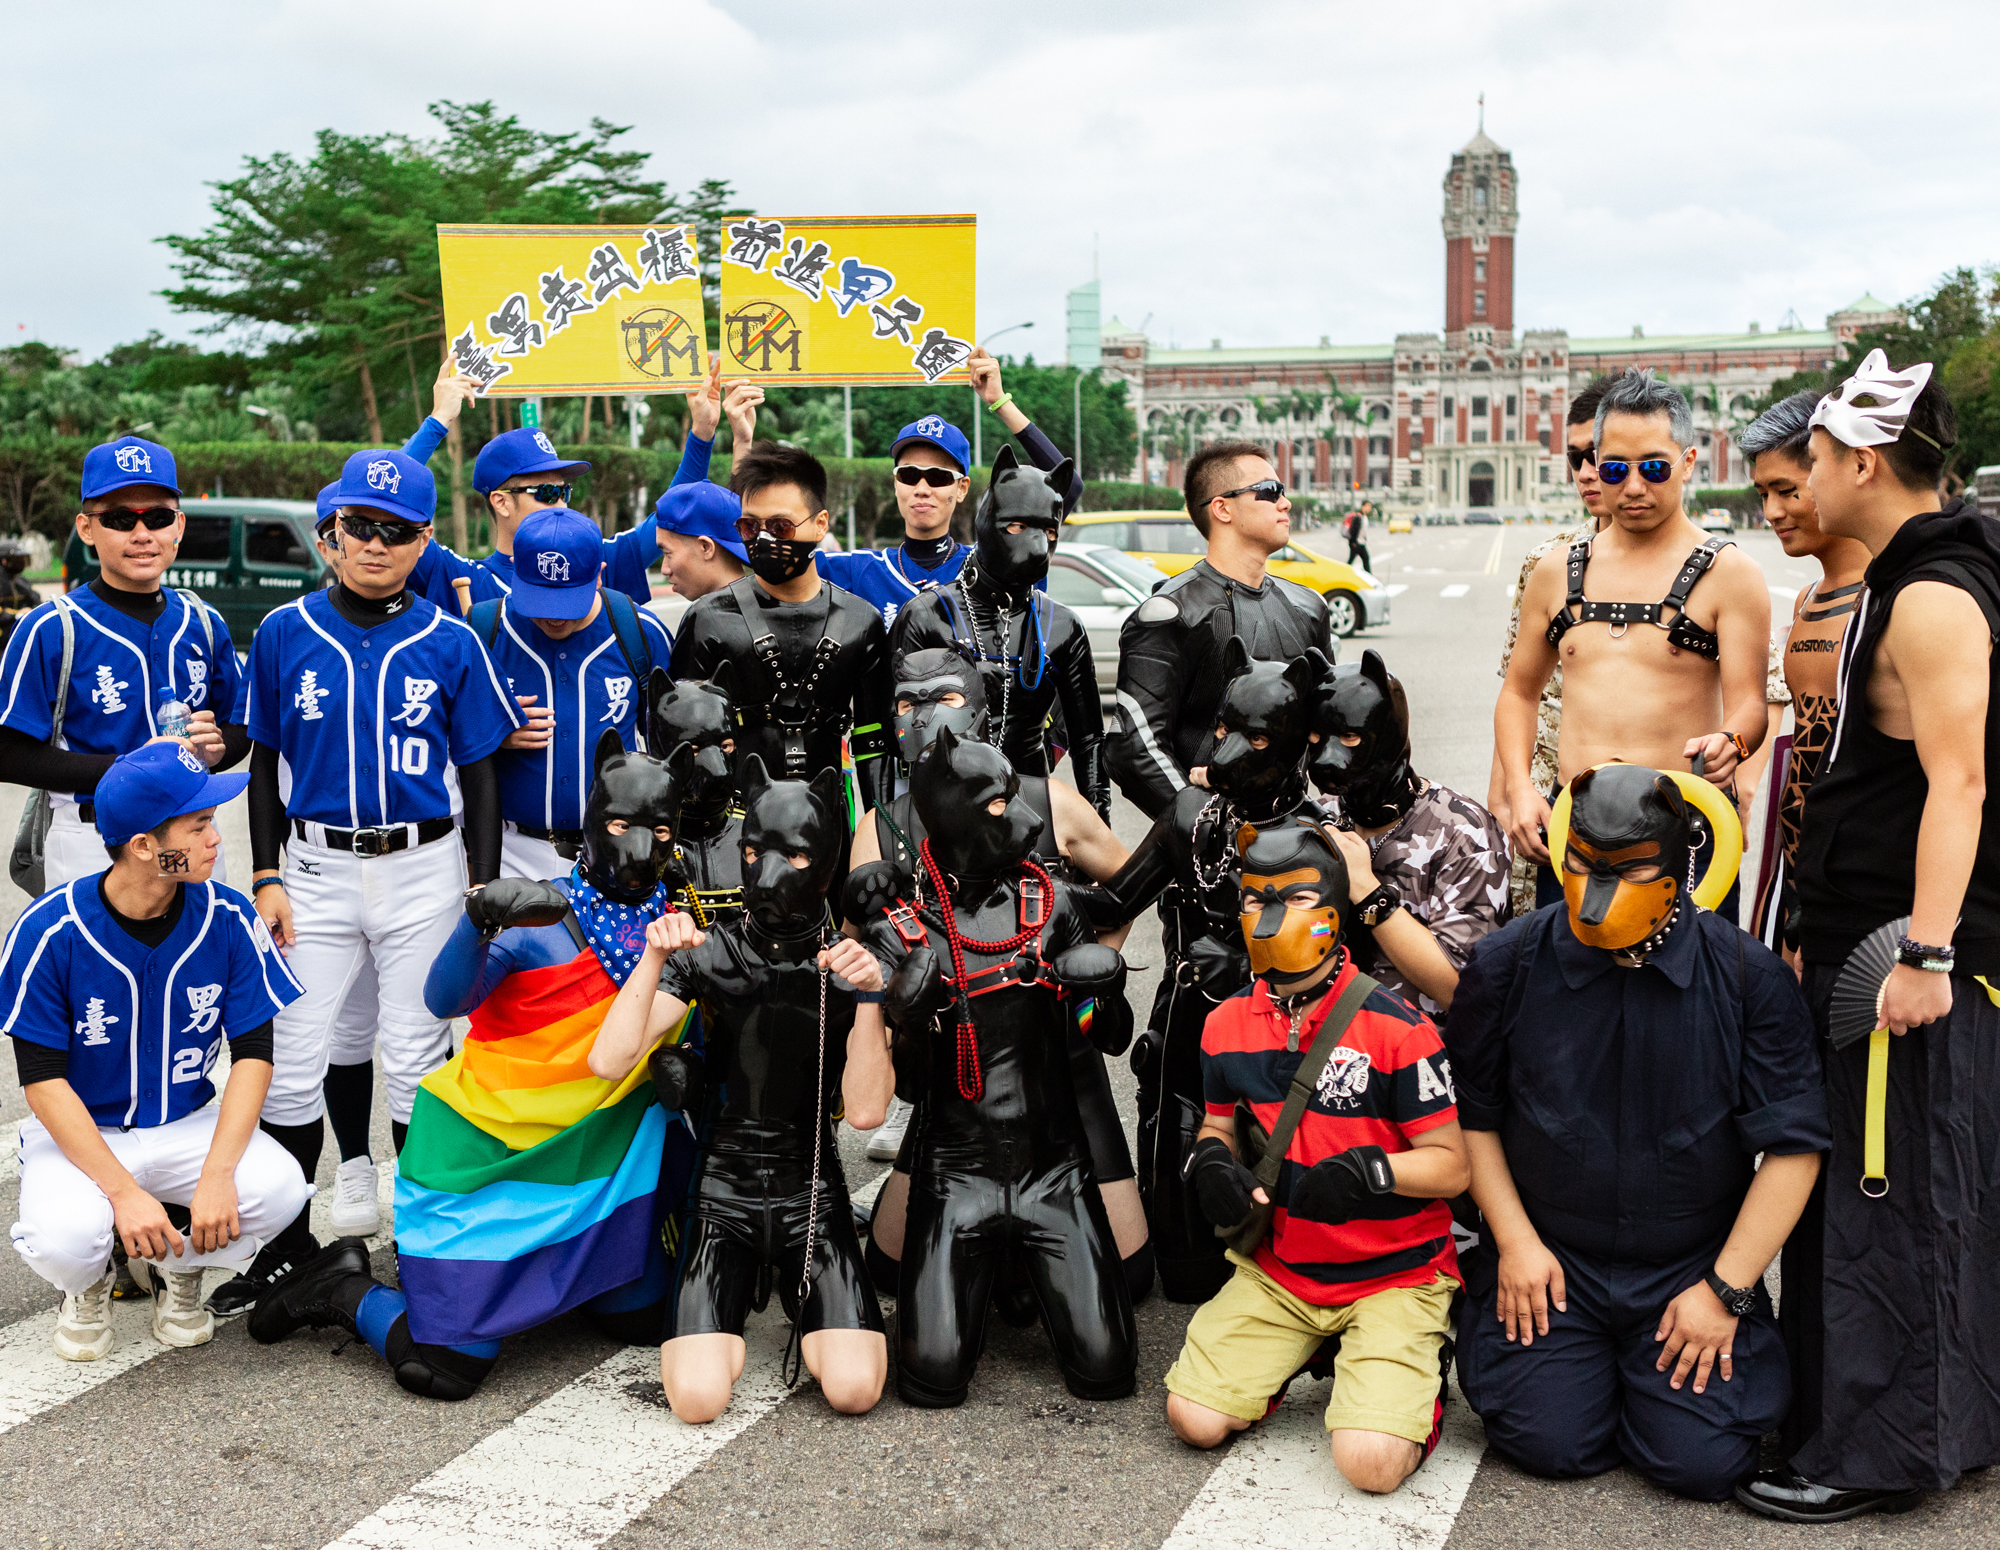 Combining forces in front of the presidential palace, Taiwan Pride, 2015